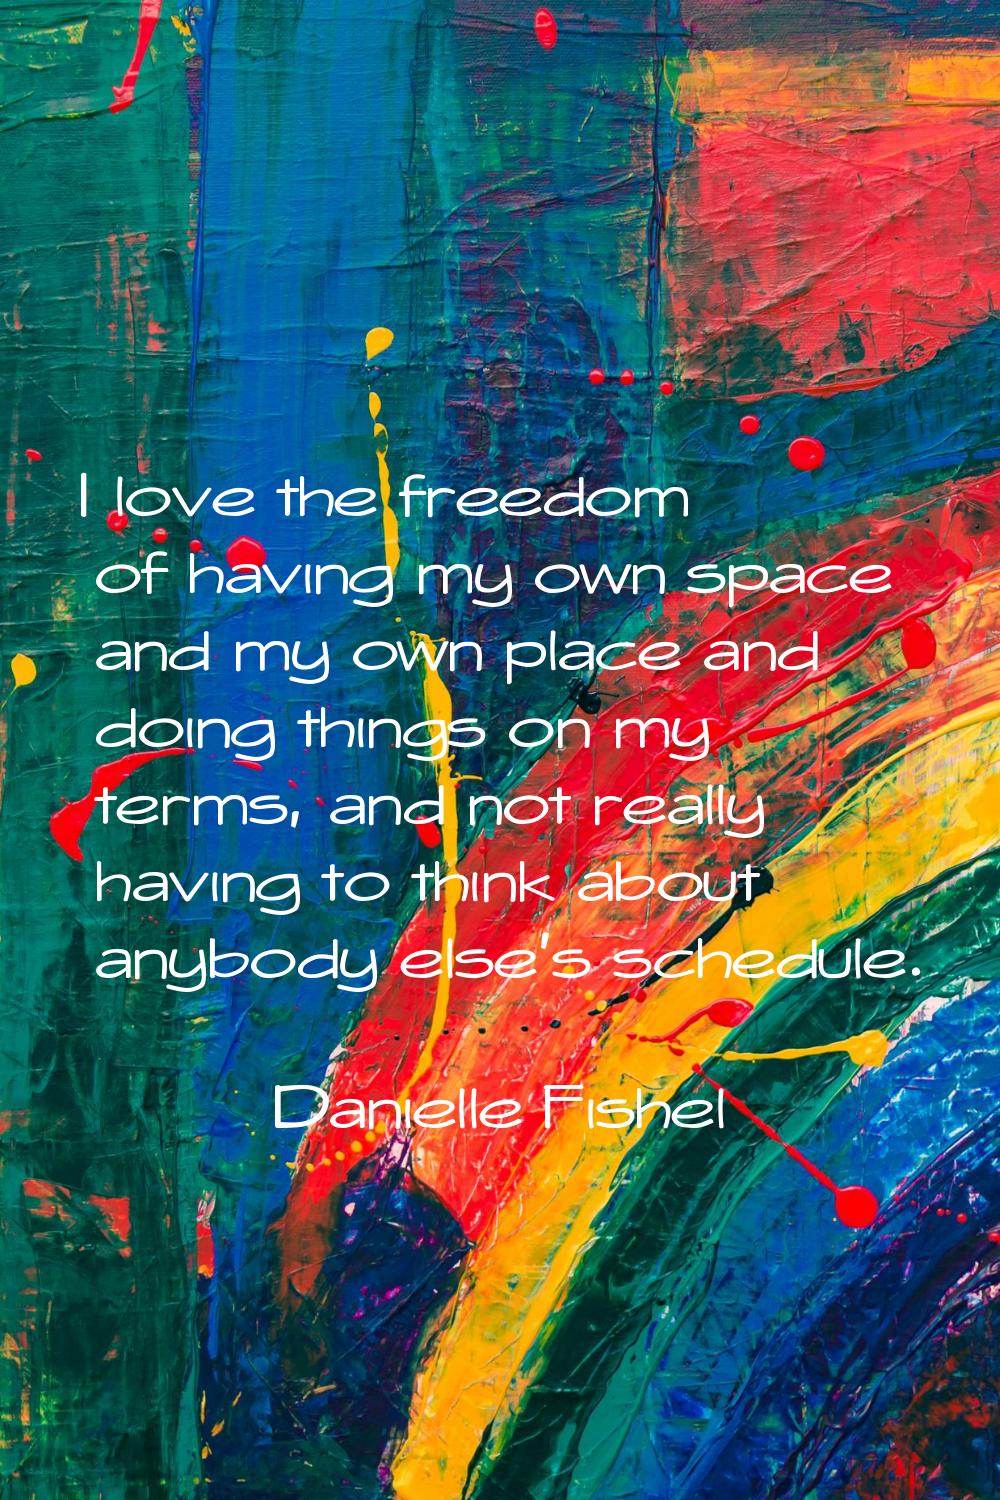 I love the freedom of having my own space and my own place and doing things on my terms, and not re